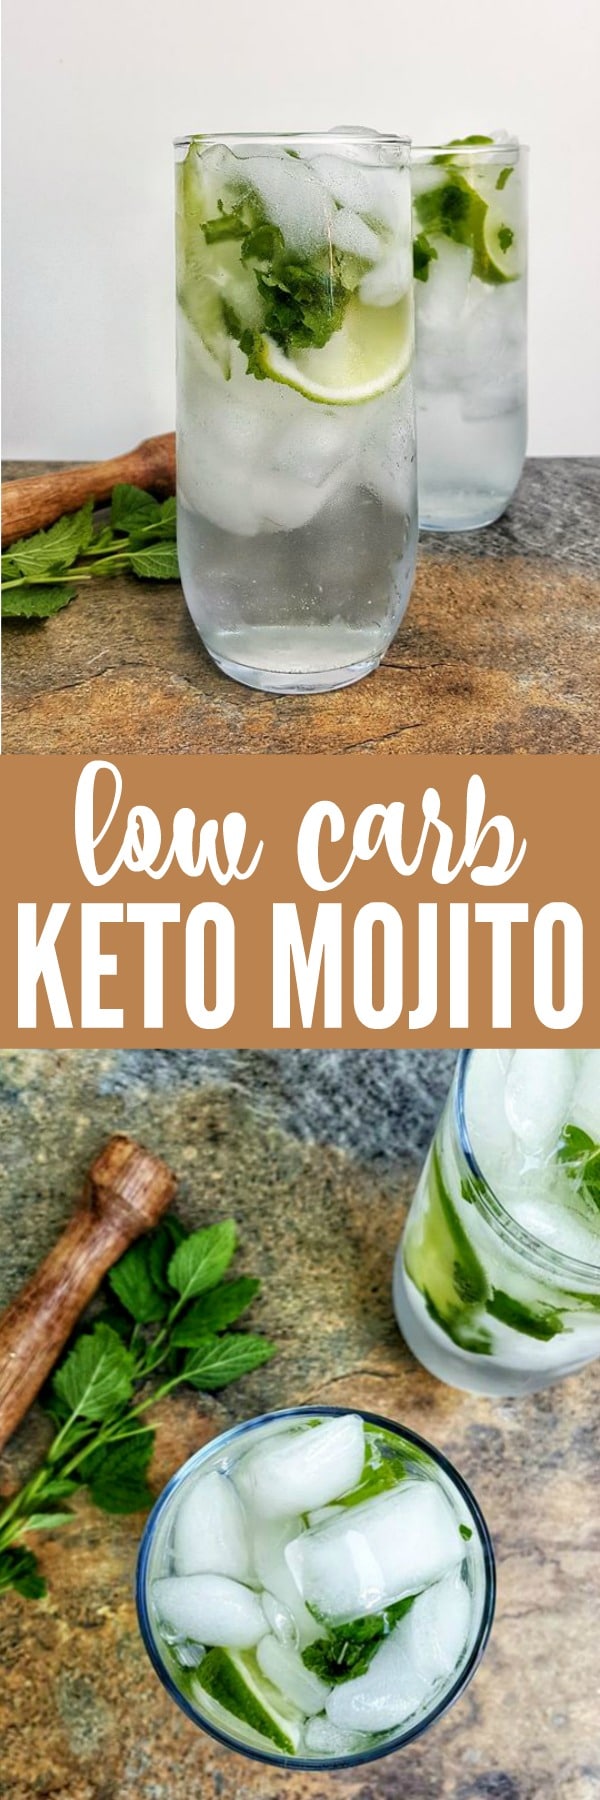 This low carb mojito is a keto friendly drink that's big on flavor and low in carbs. It's the perfect drink for summer or for socializing!